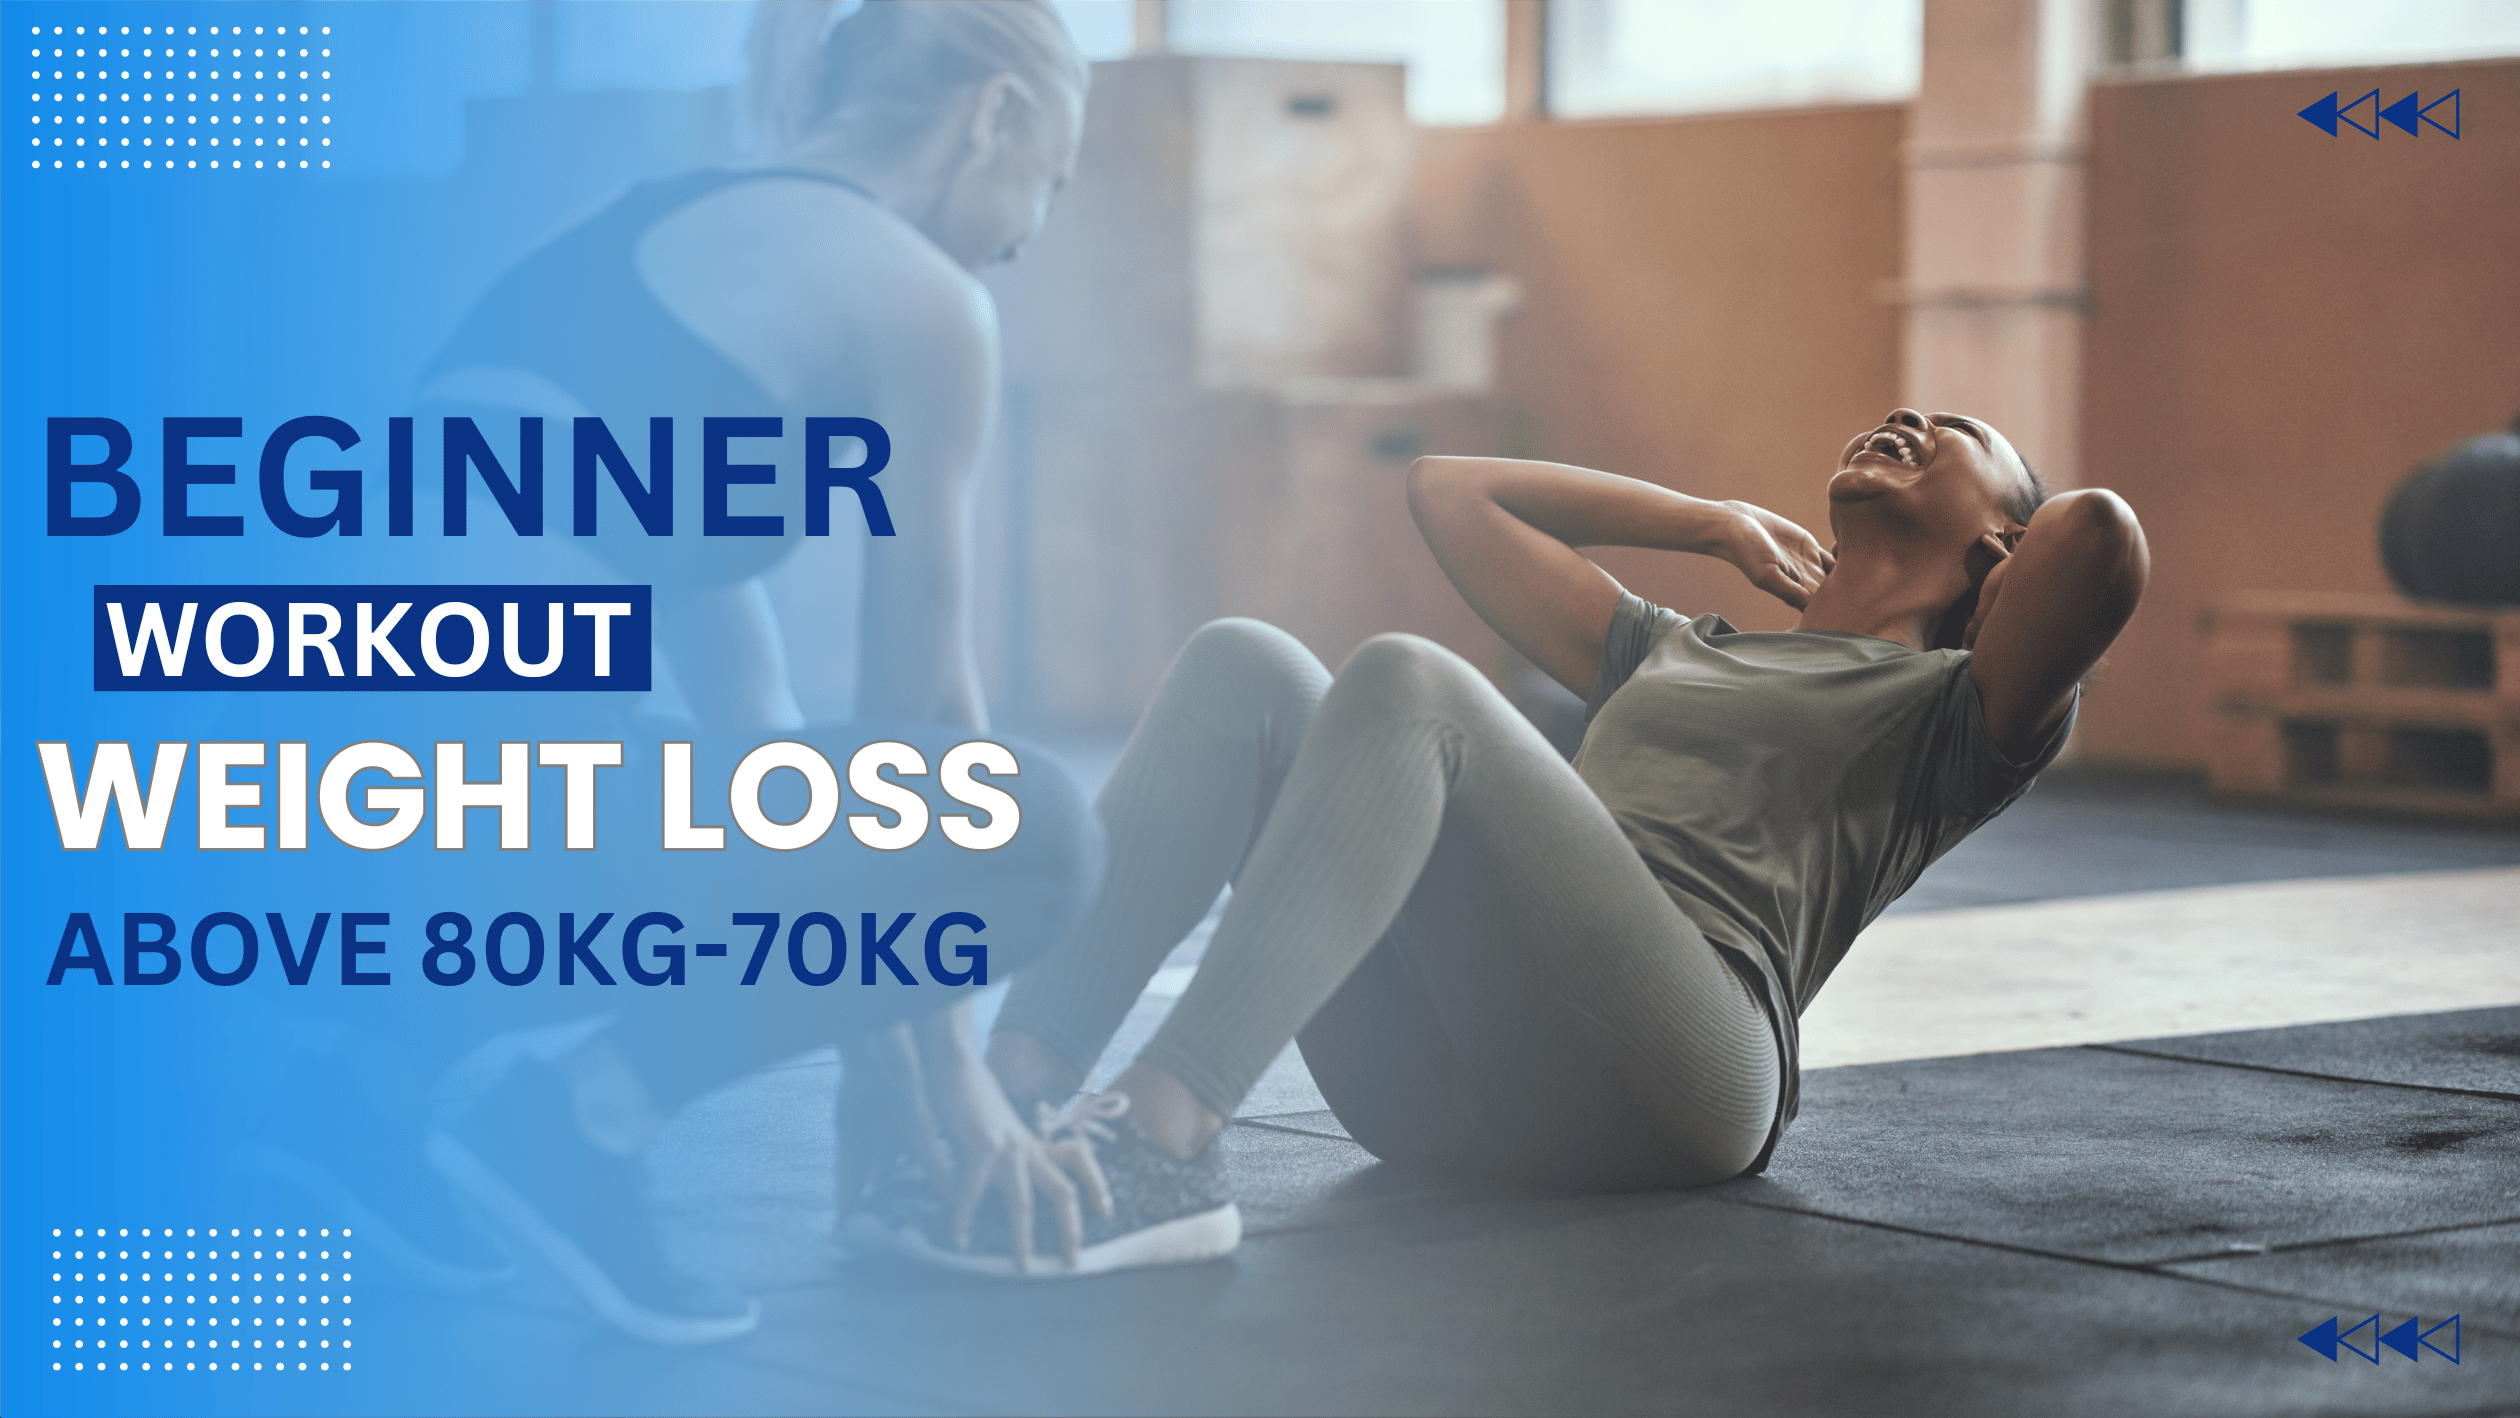 You are currently viewing BEGINNER WEIGHT LOSS WORKOUT PLAN FOR INDIVIDUALS ABOVE 80KG-70KG PEOPLE